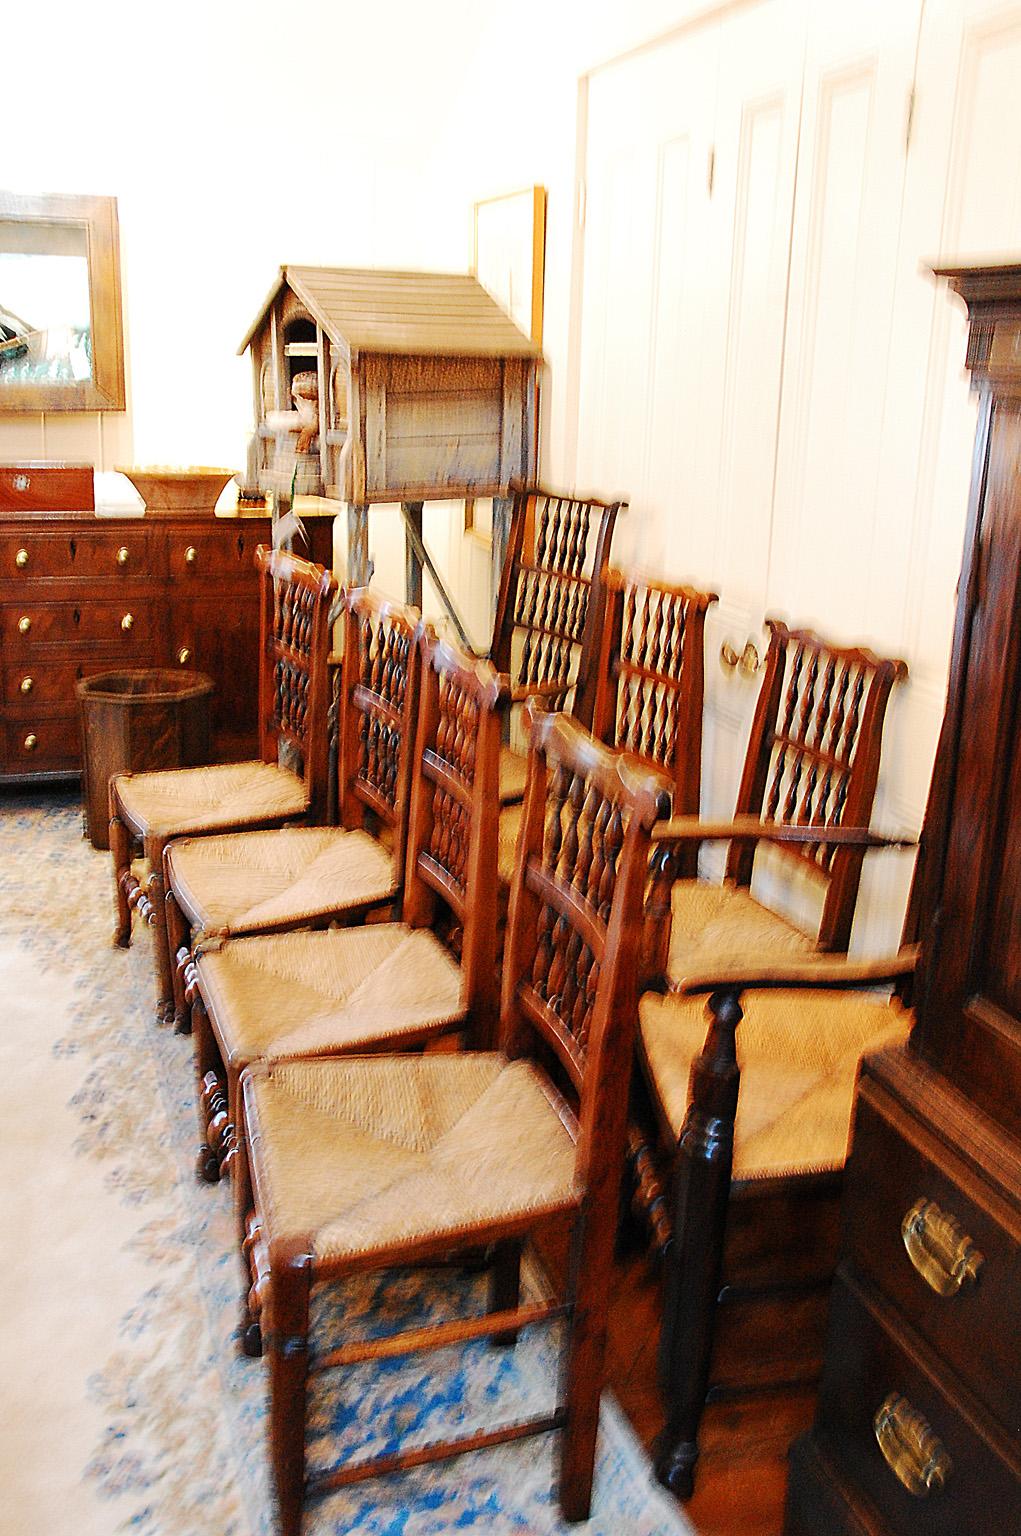 English early 19th century assembled set of eight spindleback dining chairs including two armchairs and six sidechairs. These chairs were made in the Lancashire/Cheshire region of England and typically were purchased over a period of time, rather